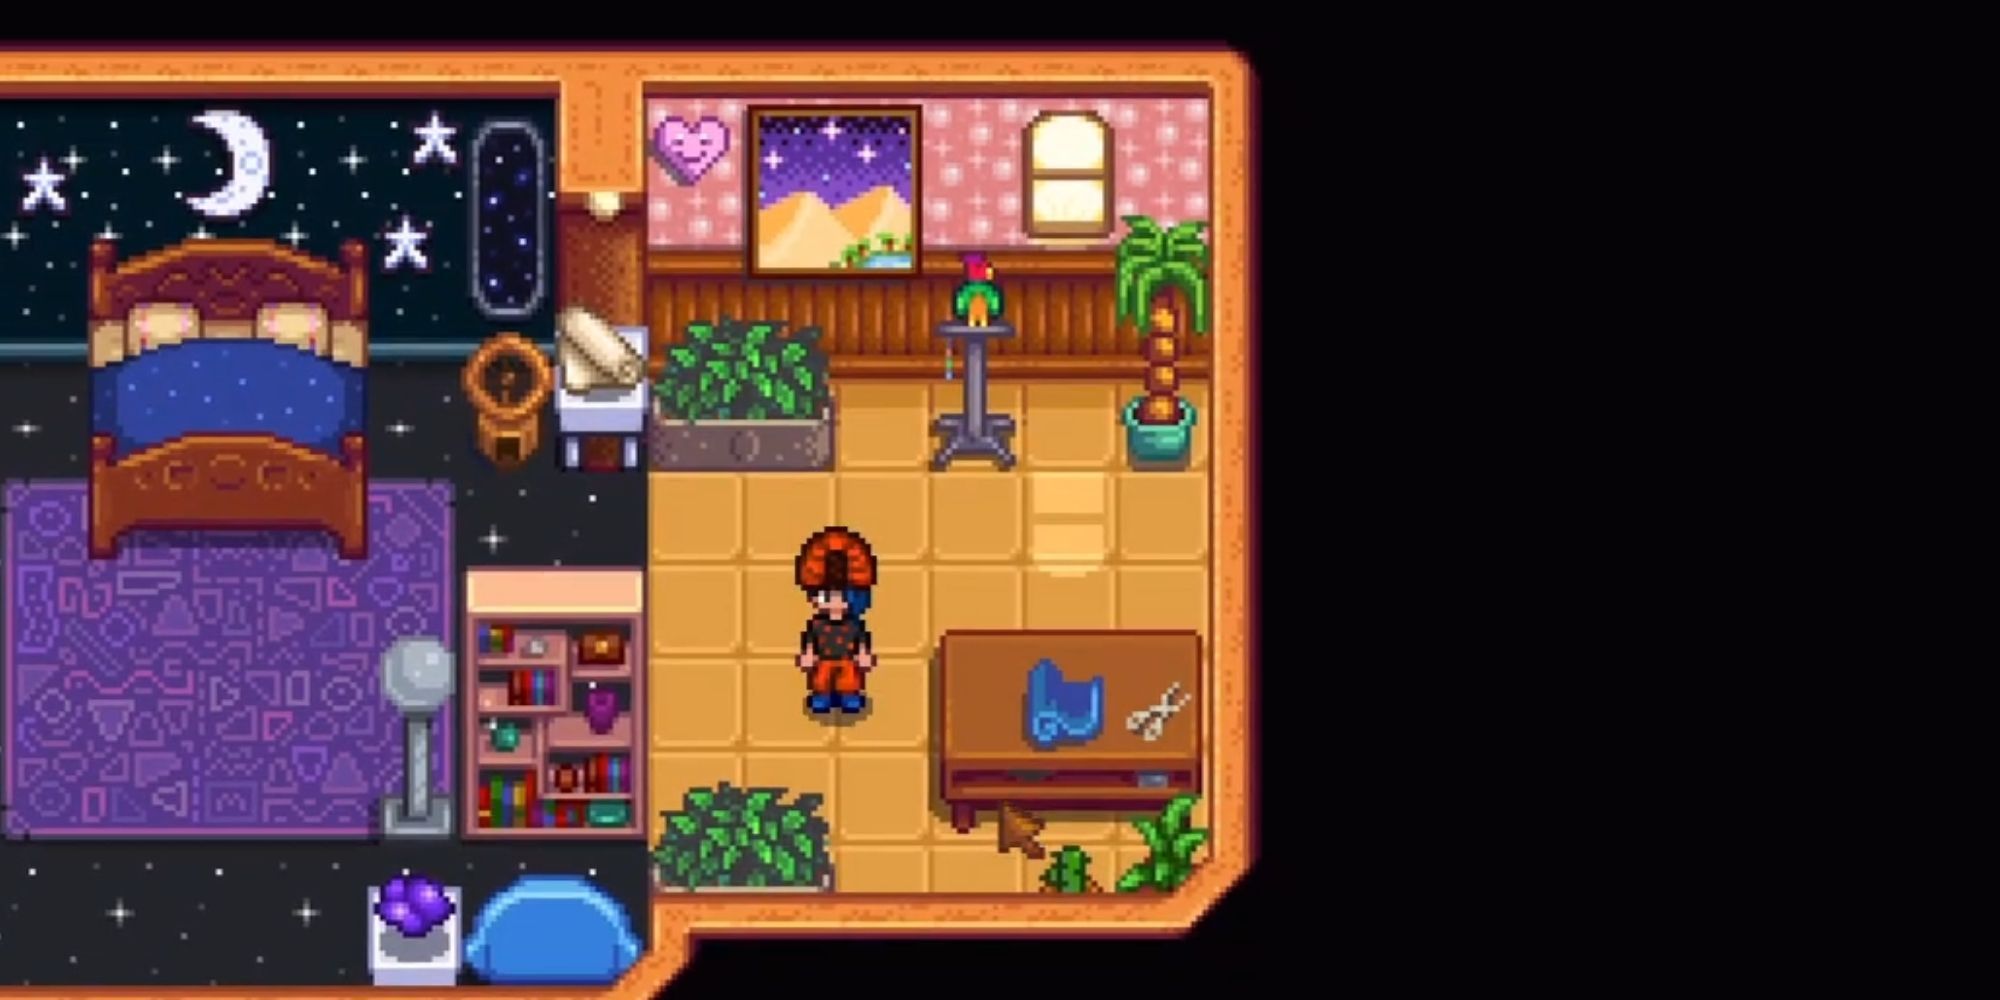 The Player Character In Emily's Room In Stardew Valley